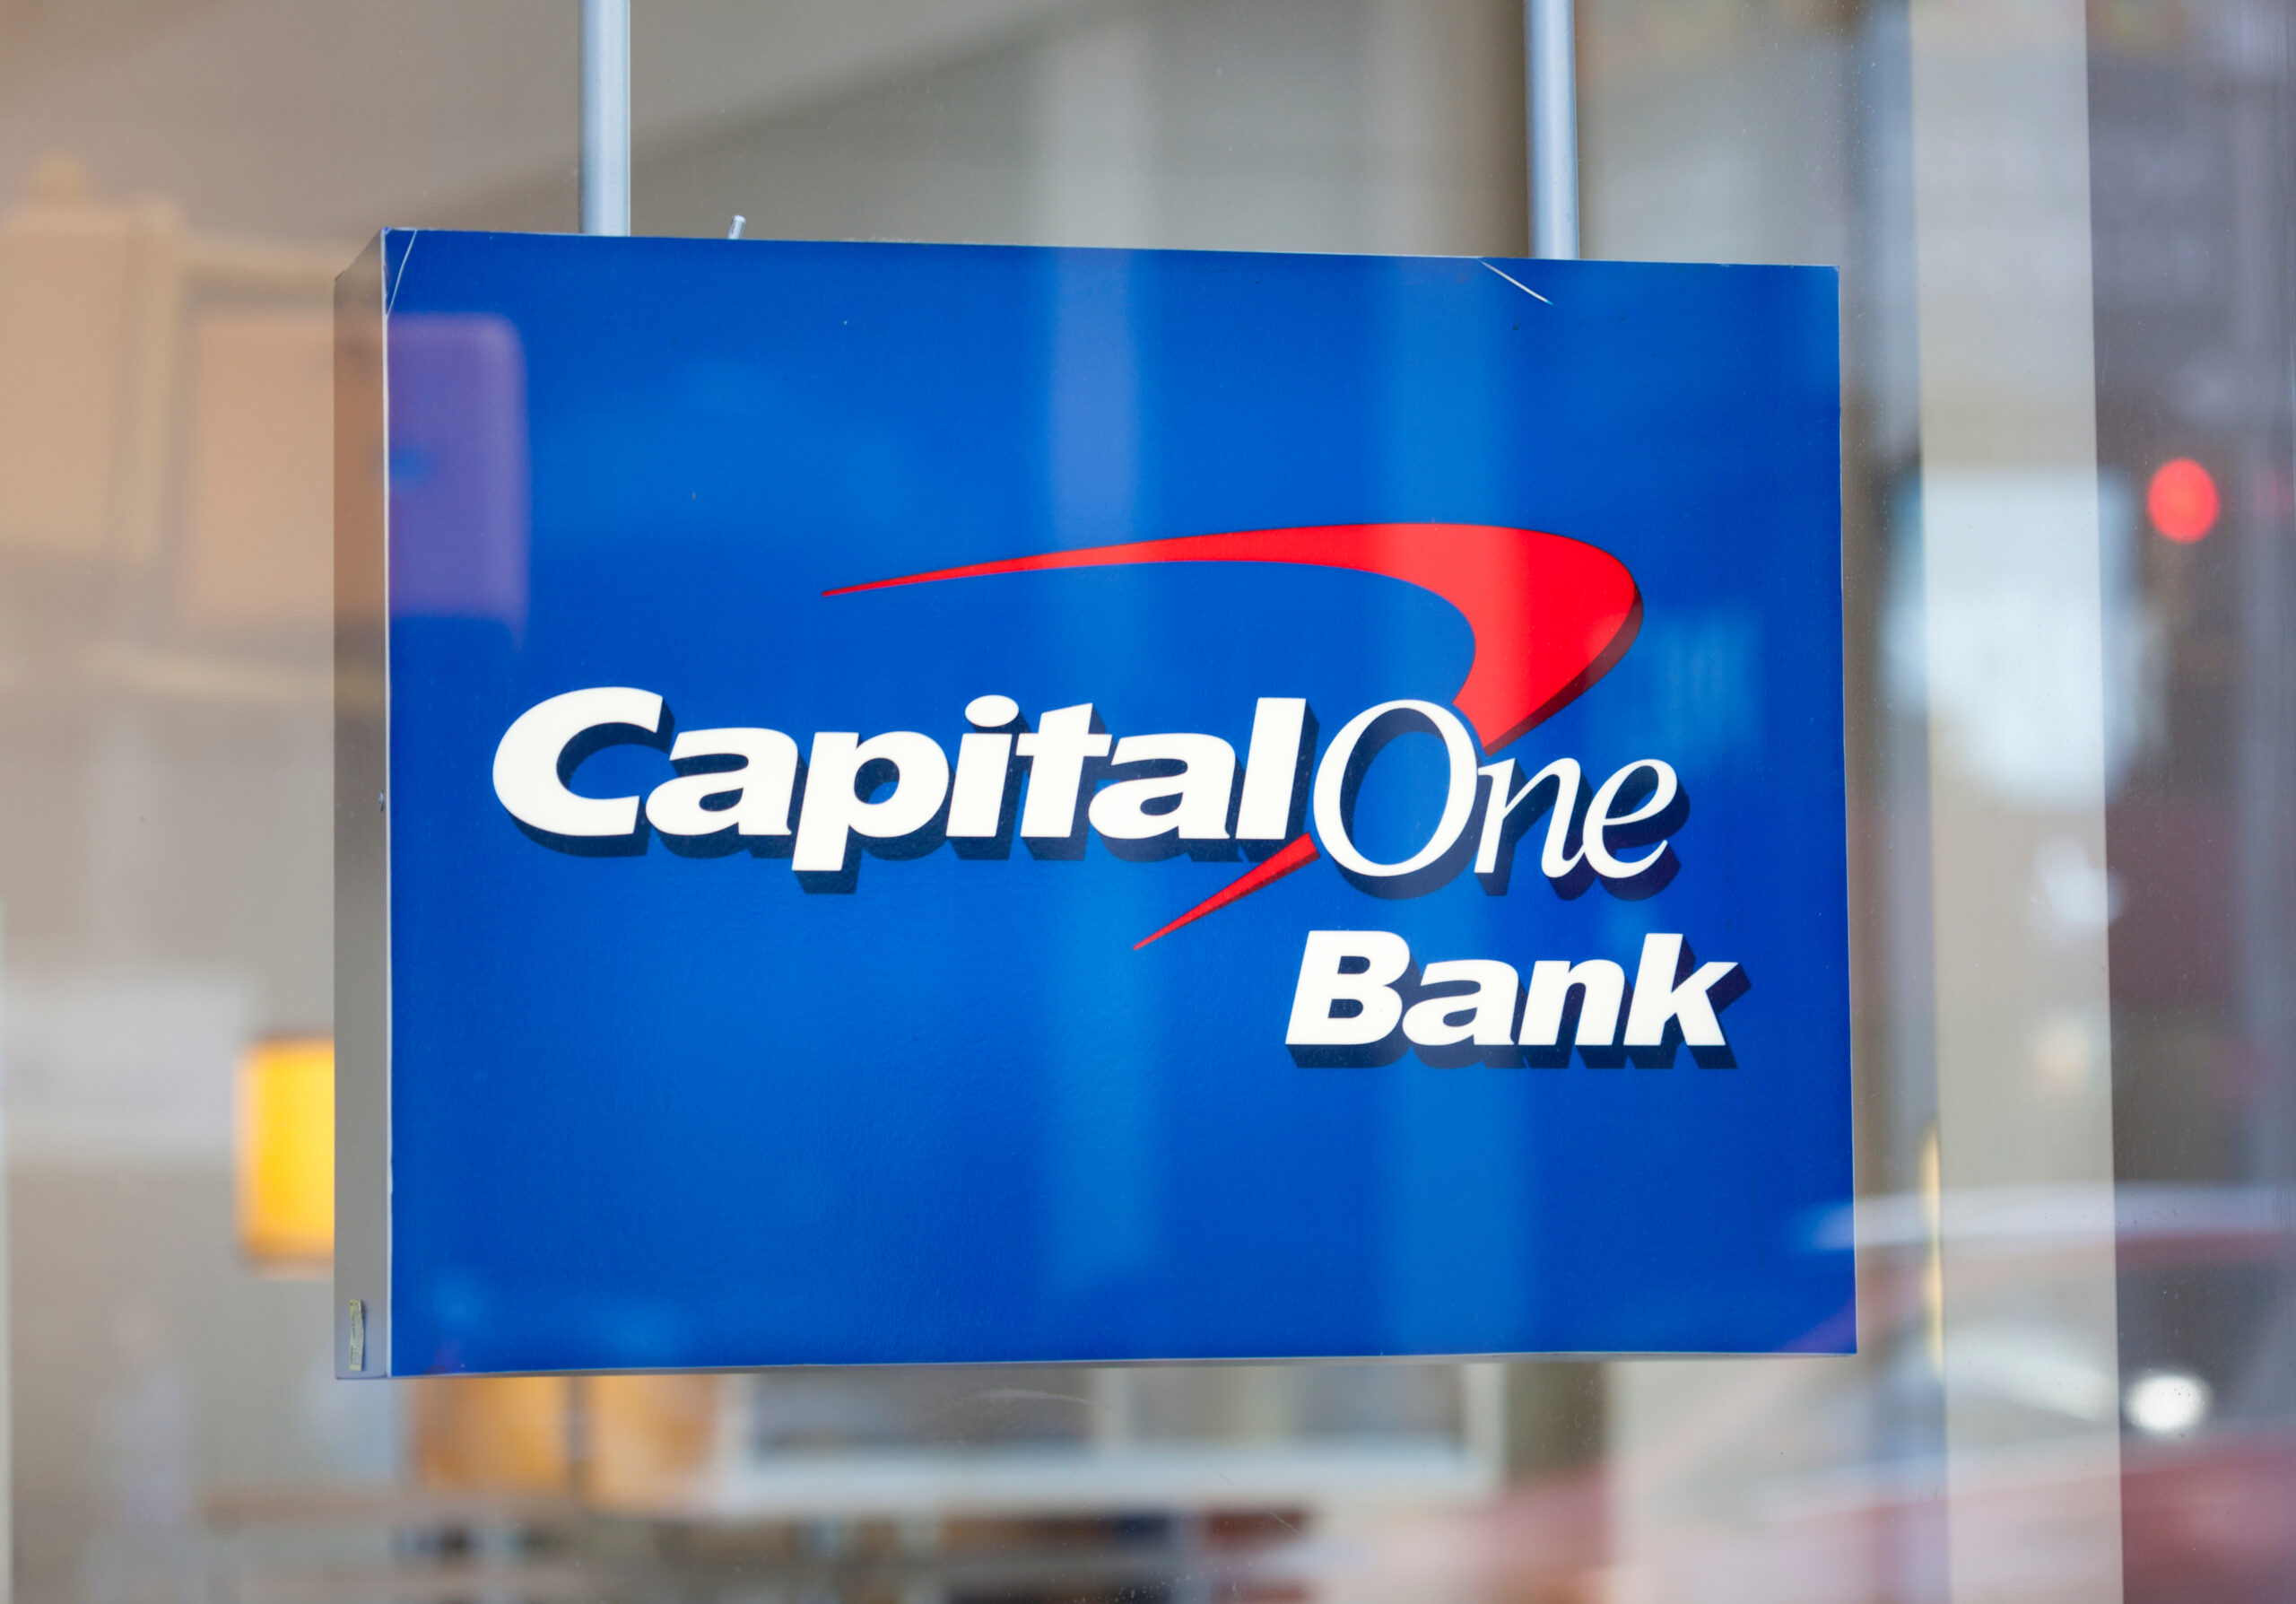 New York, New York, USA - October 10, 2019: Capital One Bank sign in a window.